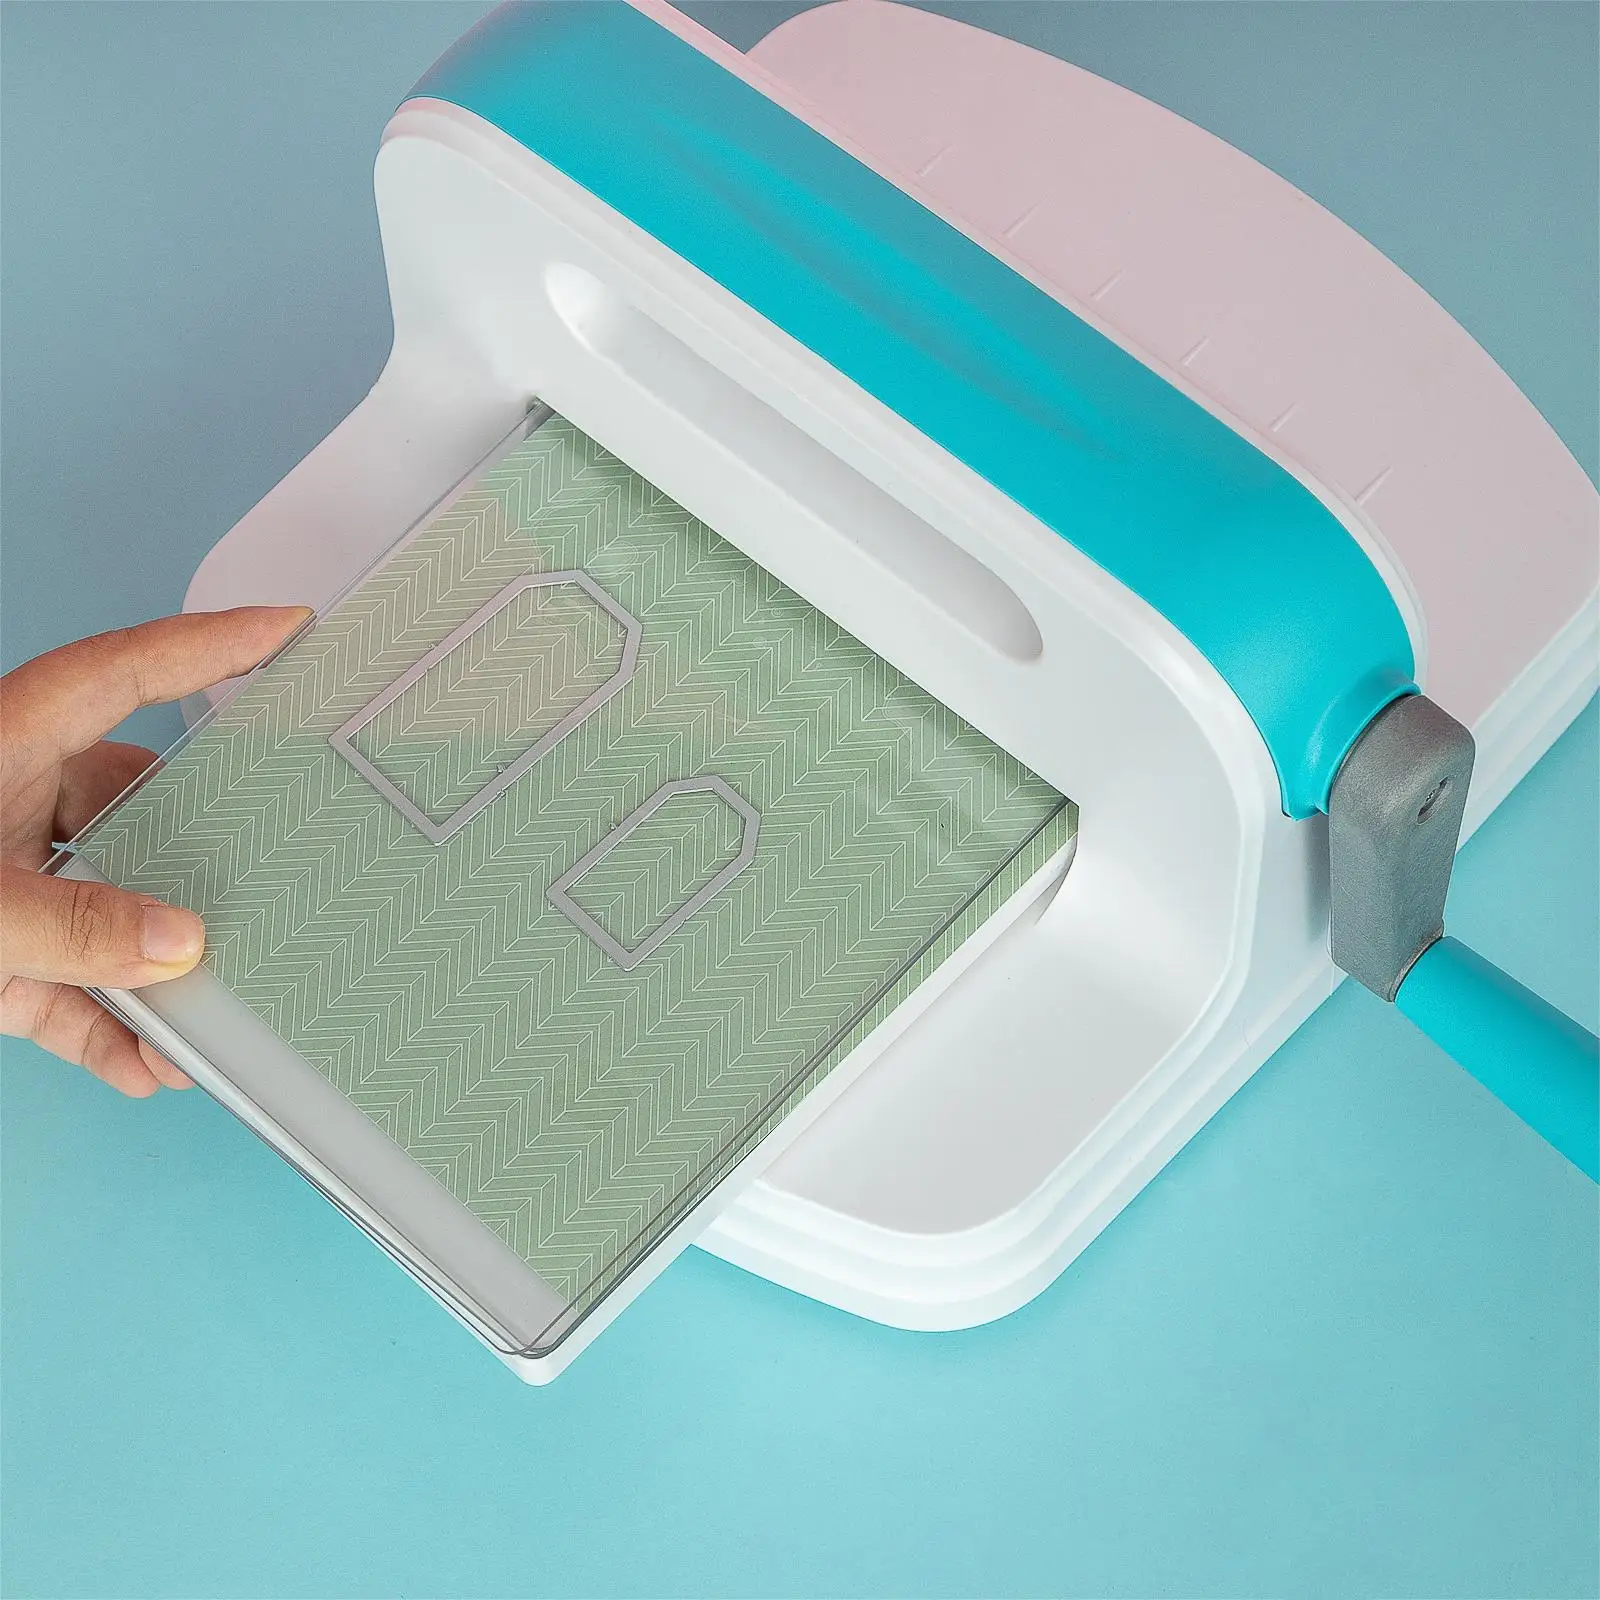 Die Cutting and Embossing Machine Paper Cutter for Card Making Manual Decorative Cardmaking Embossing Scrapbooking